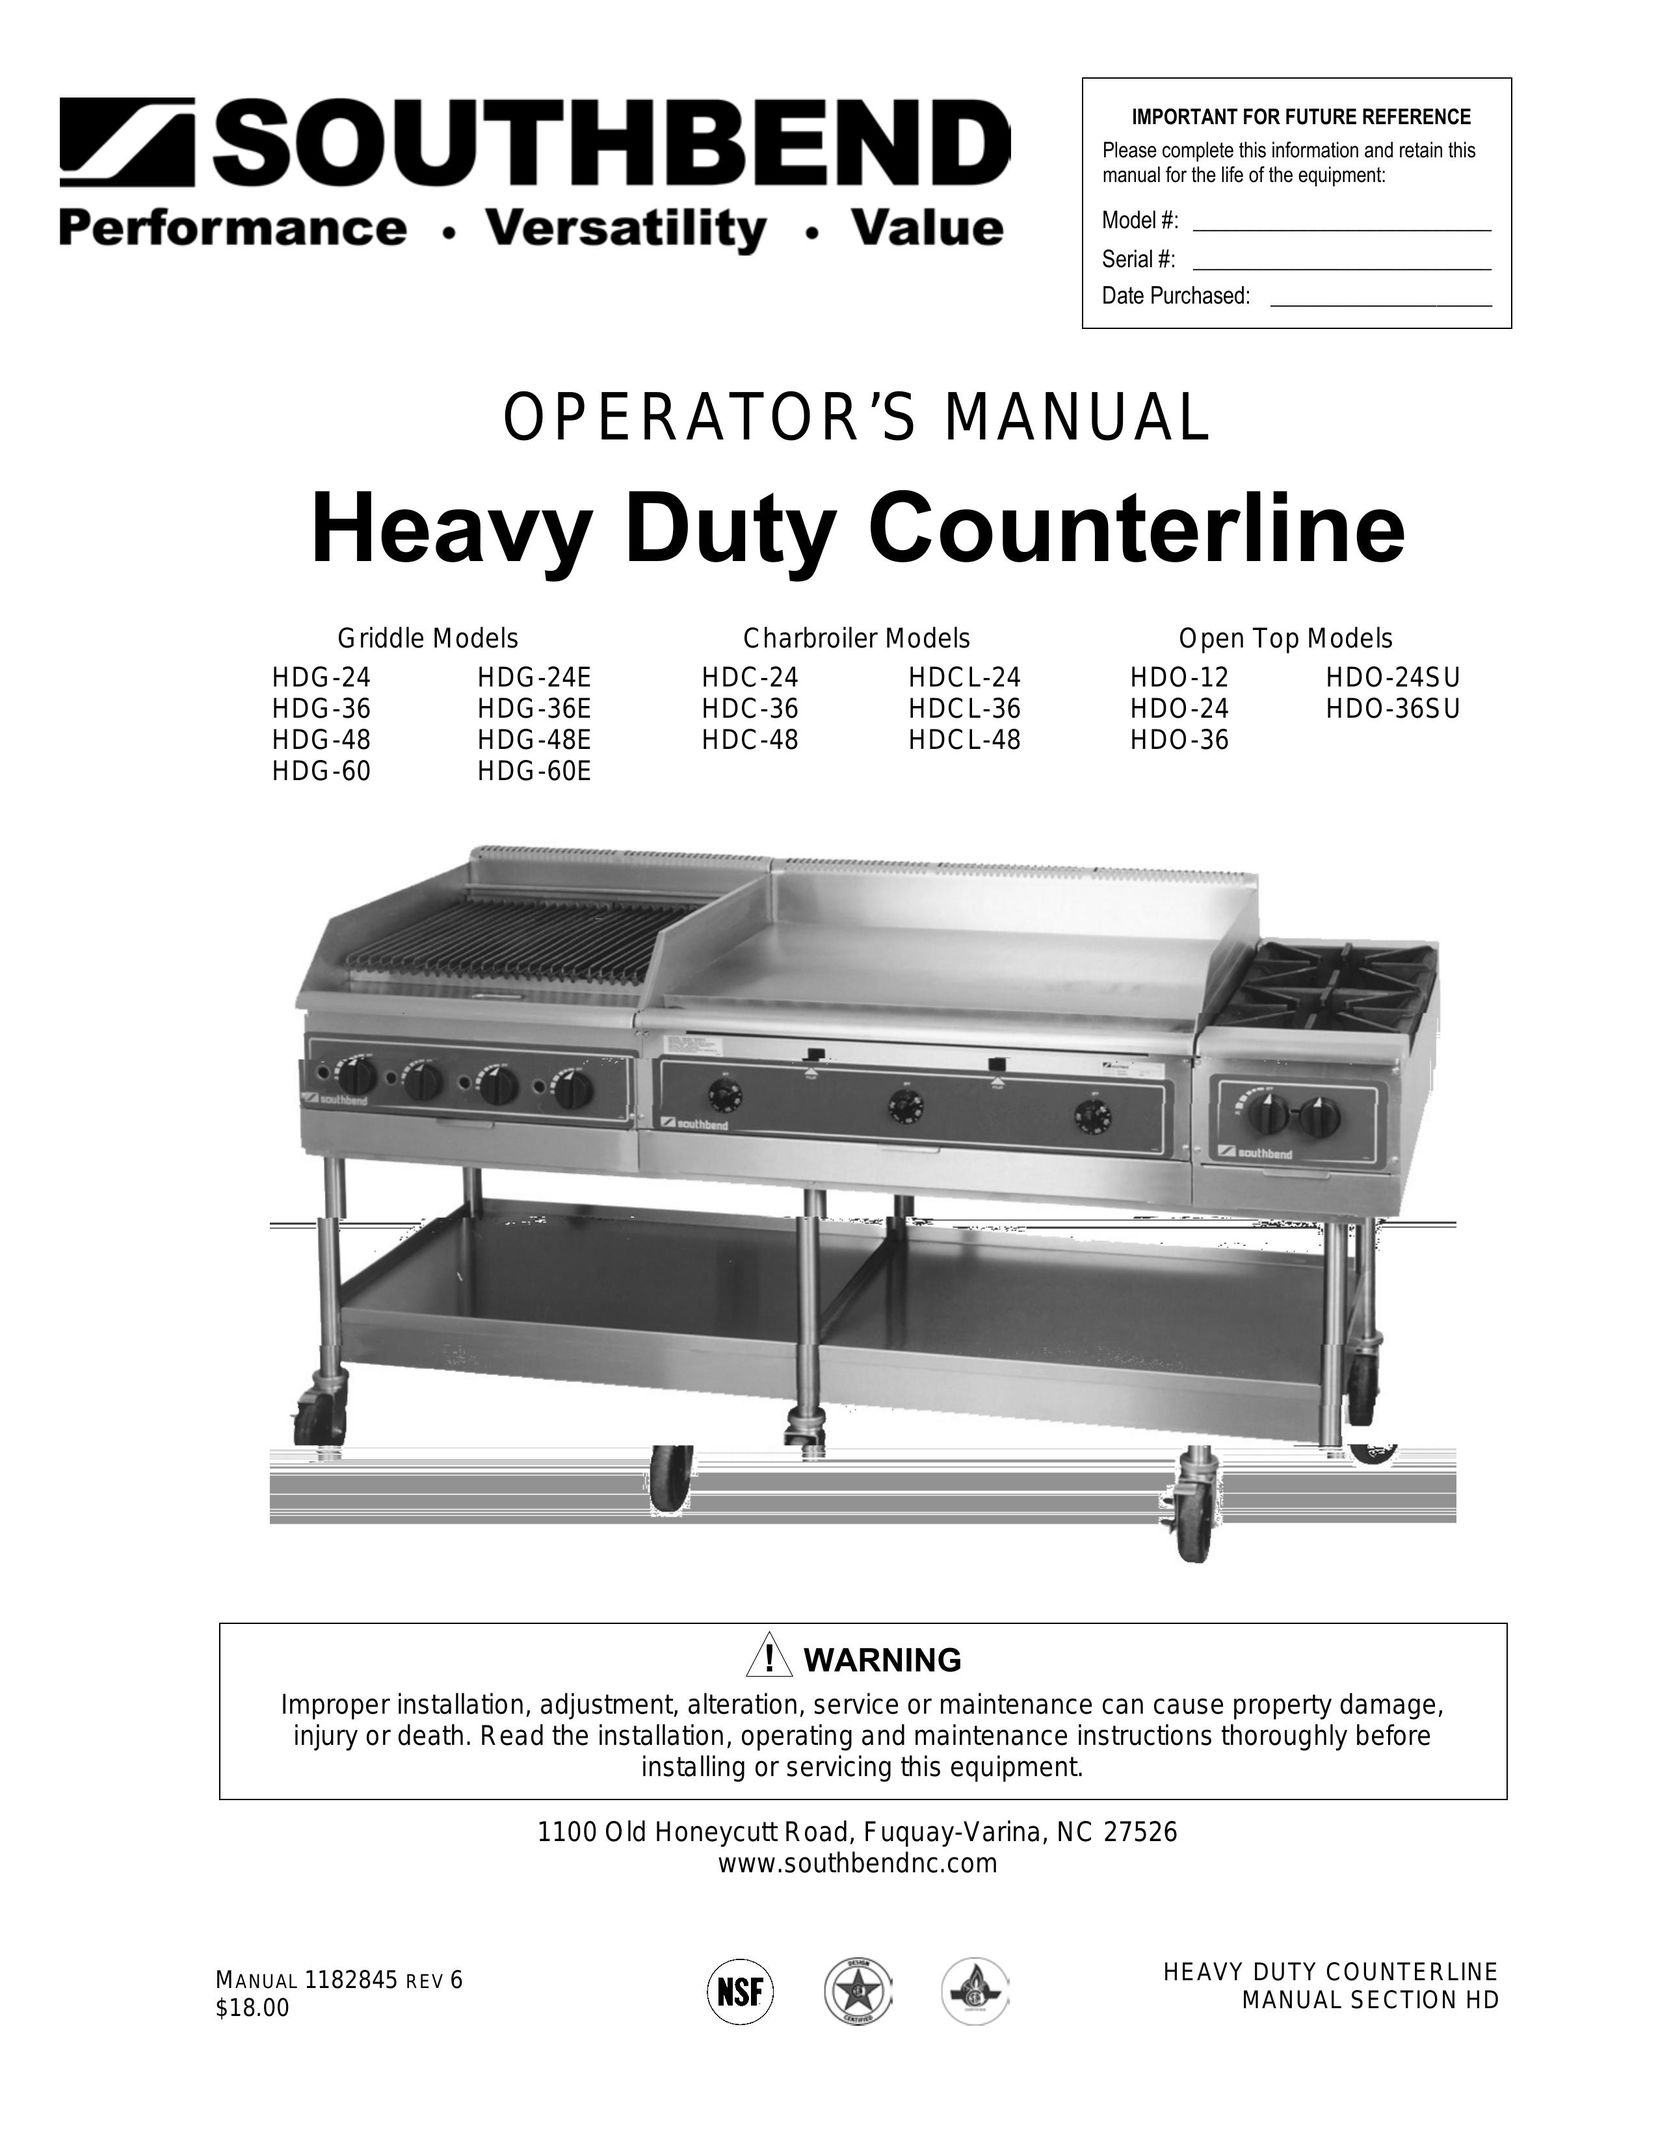 Southbend HDG-24 Cooktop User Manual